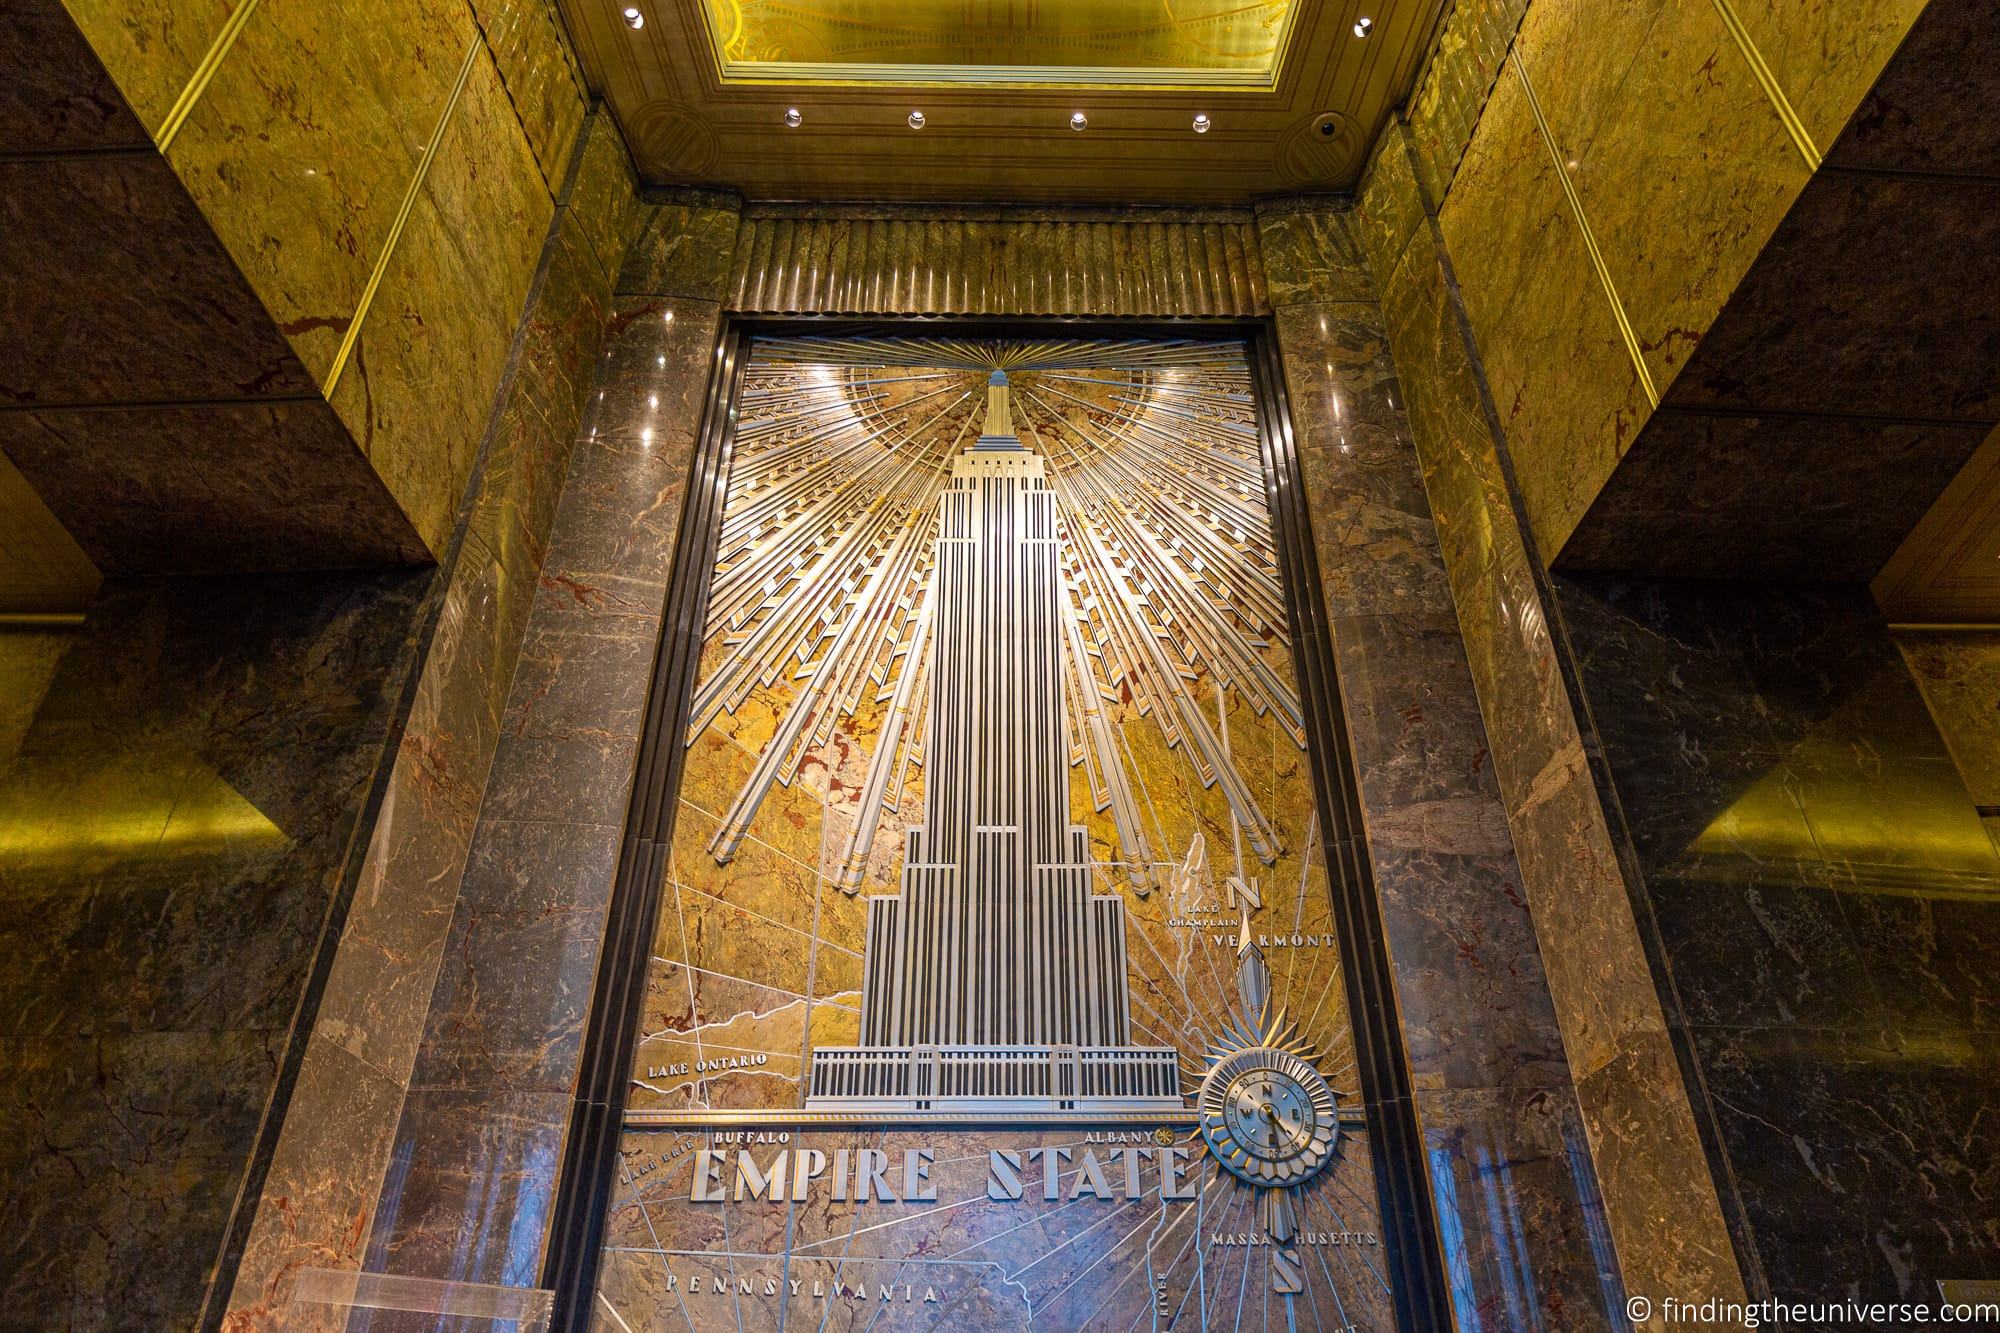 tour of empire state building